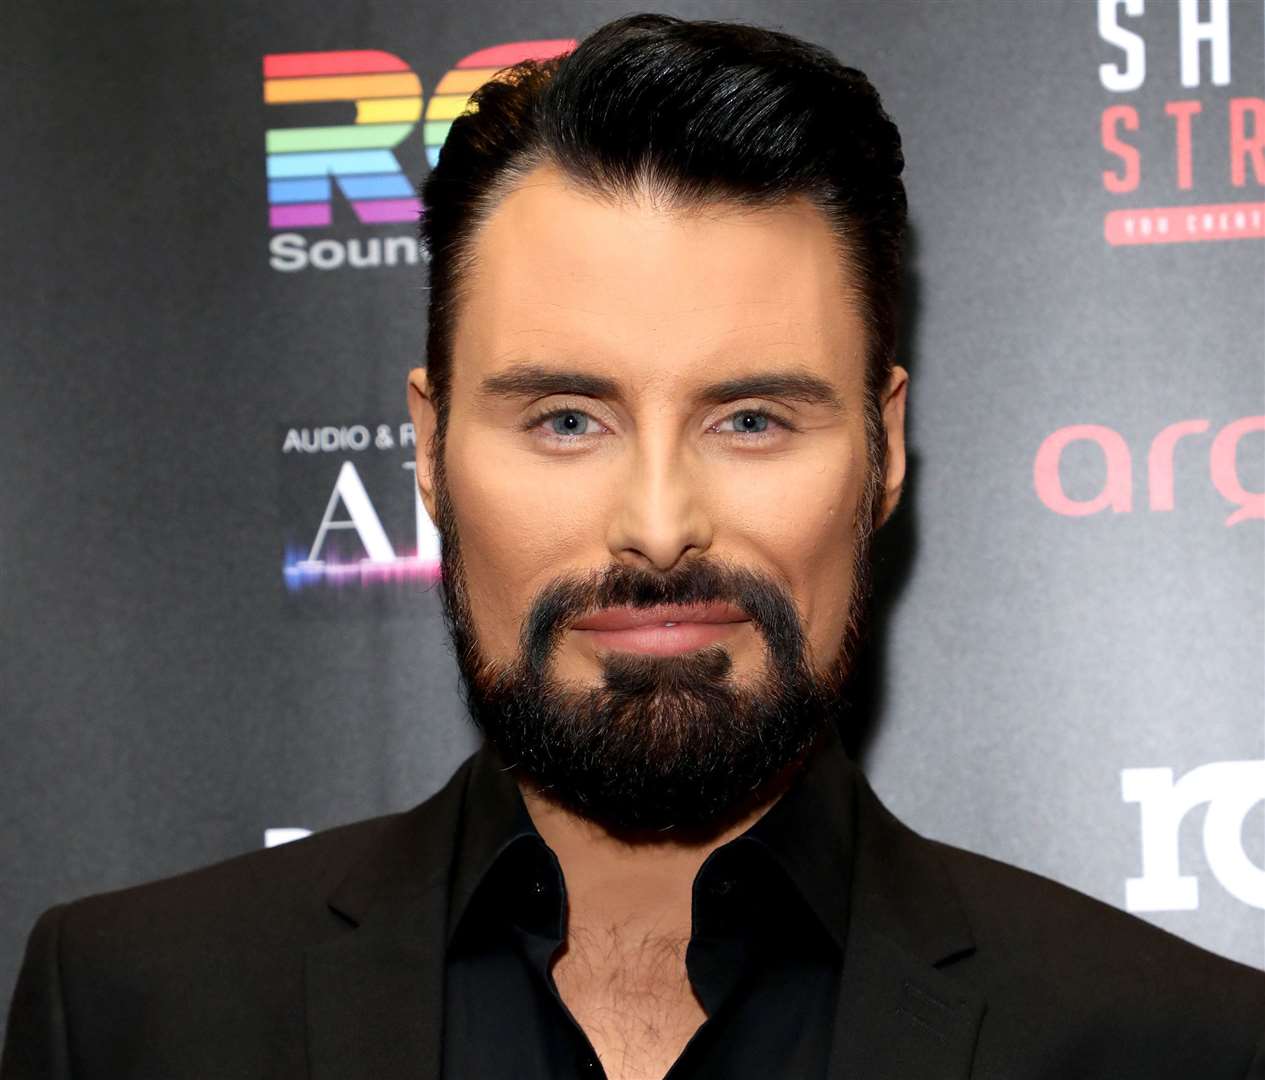 Rylan will return to Kent for a DJ set in Maidstone in July